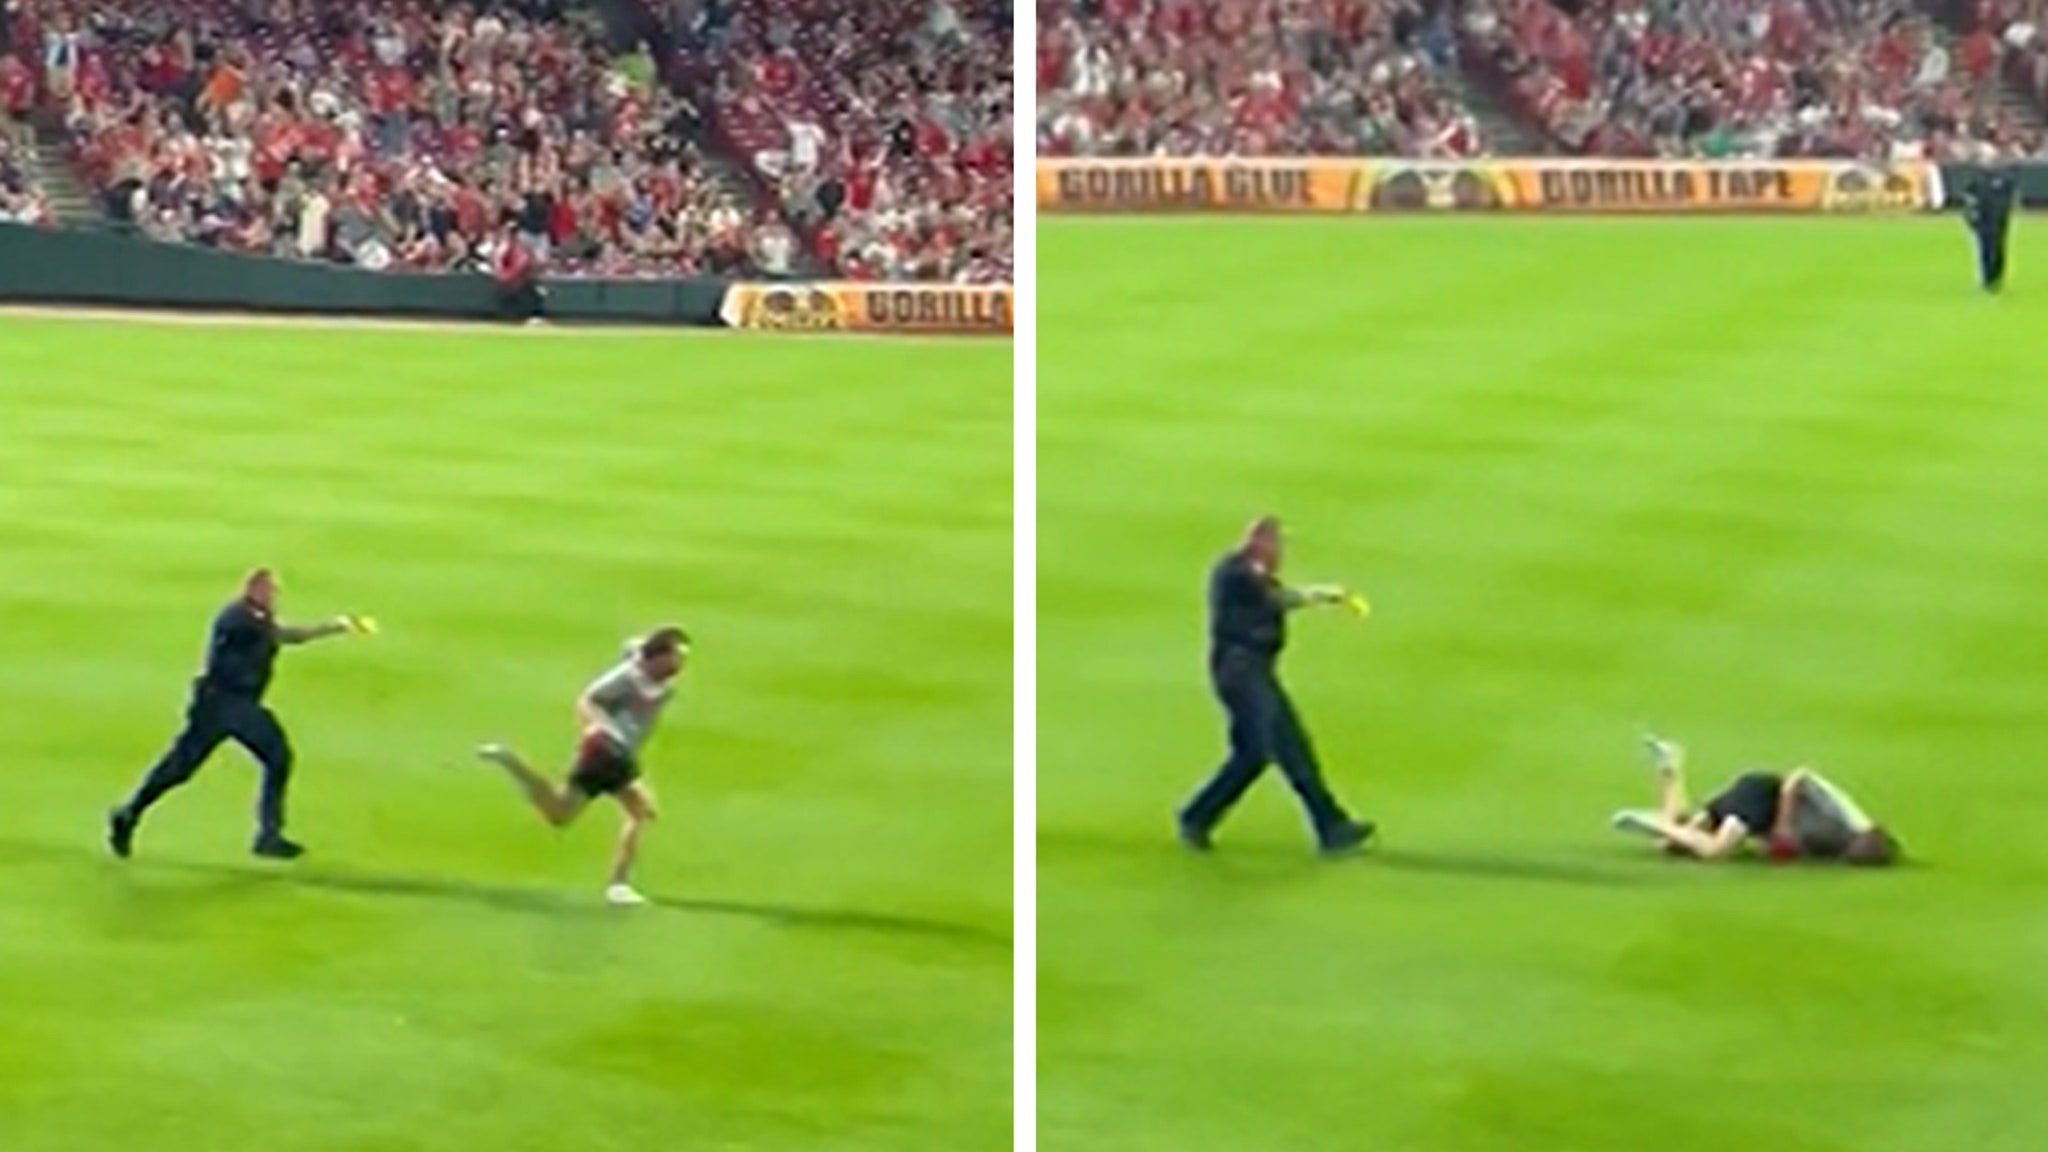 mlb-fan-gets-tasered-and-handcuffed-after-running-onto-field,-video